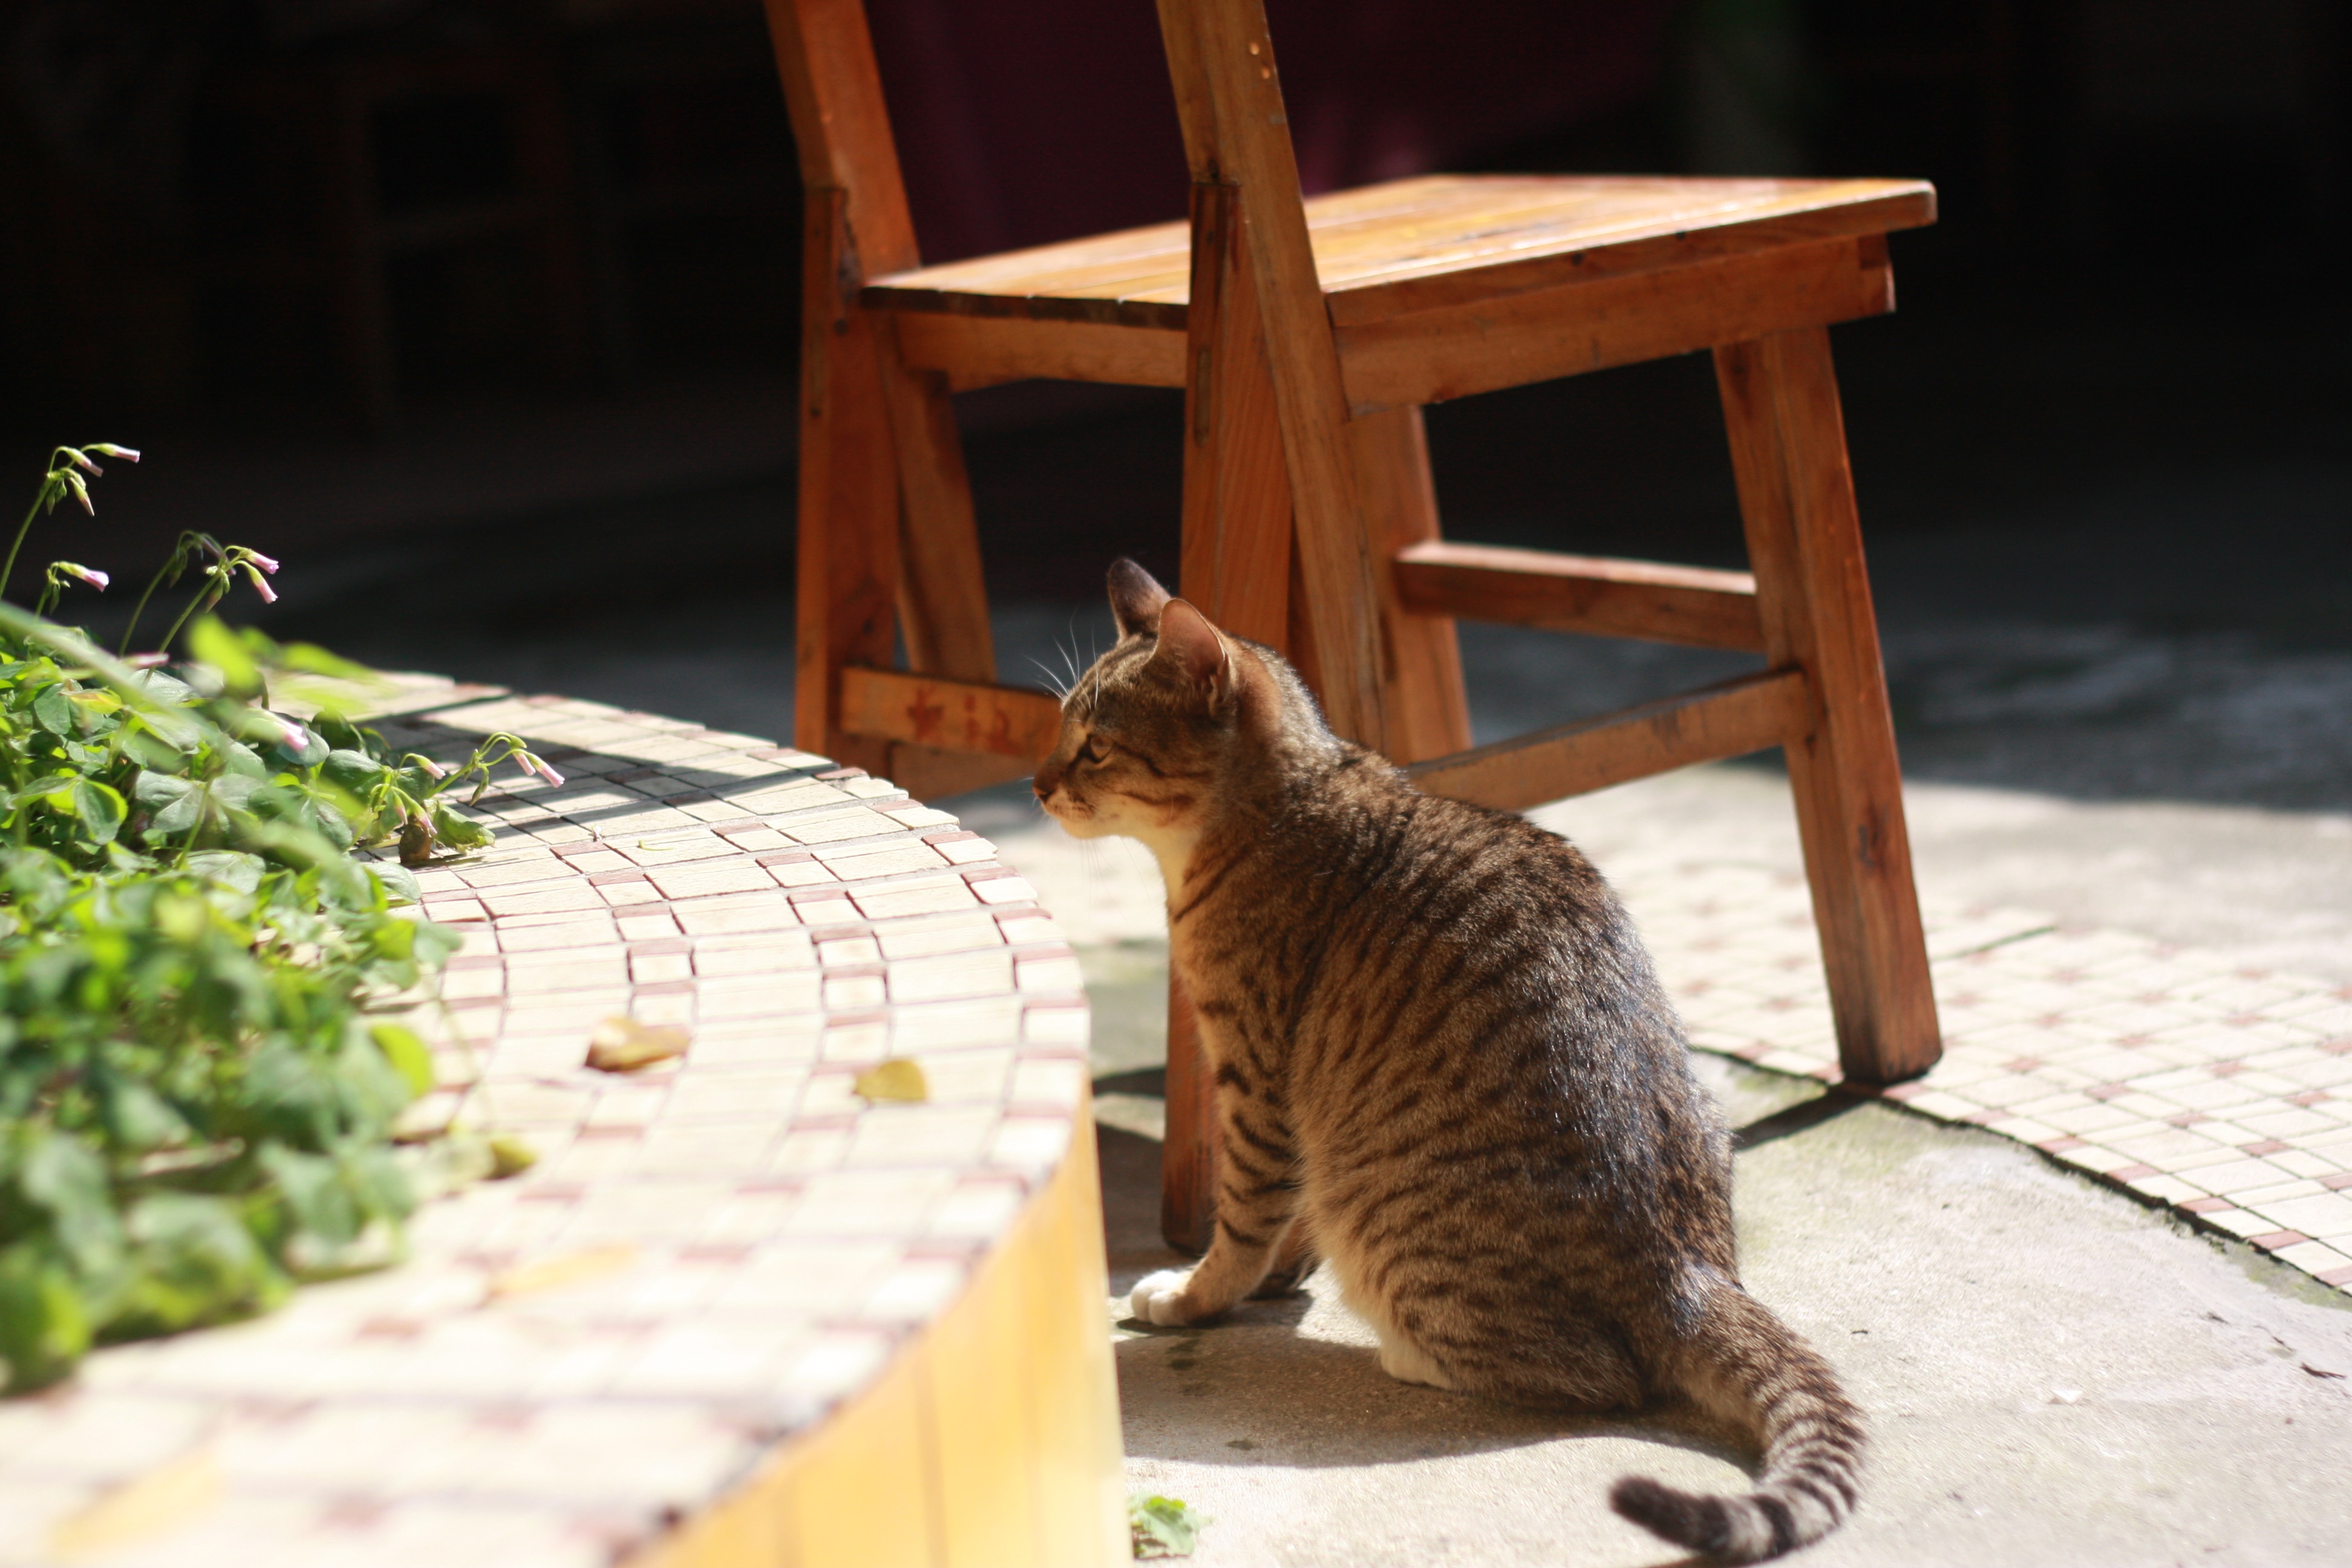 brown tabby cat beside wooden chair during daytime